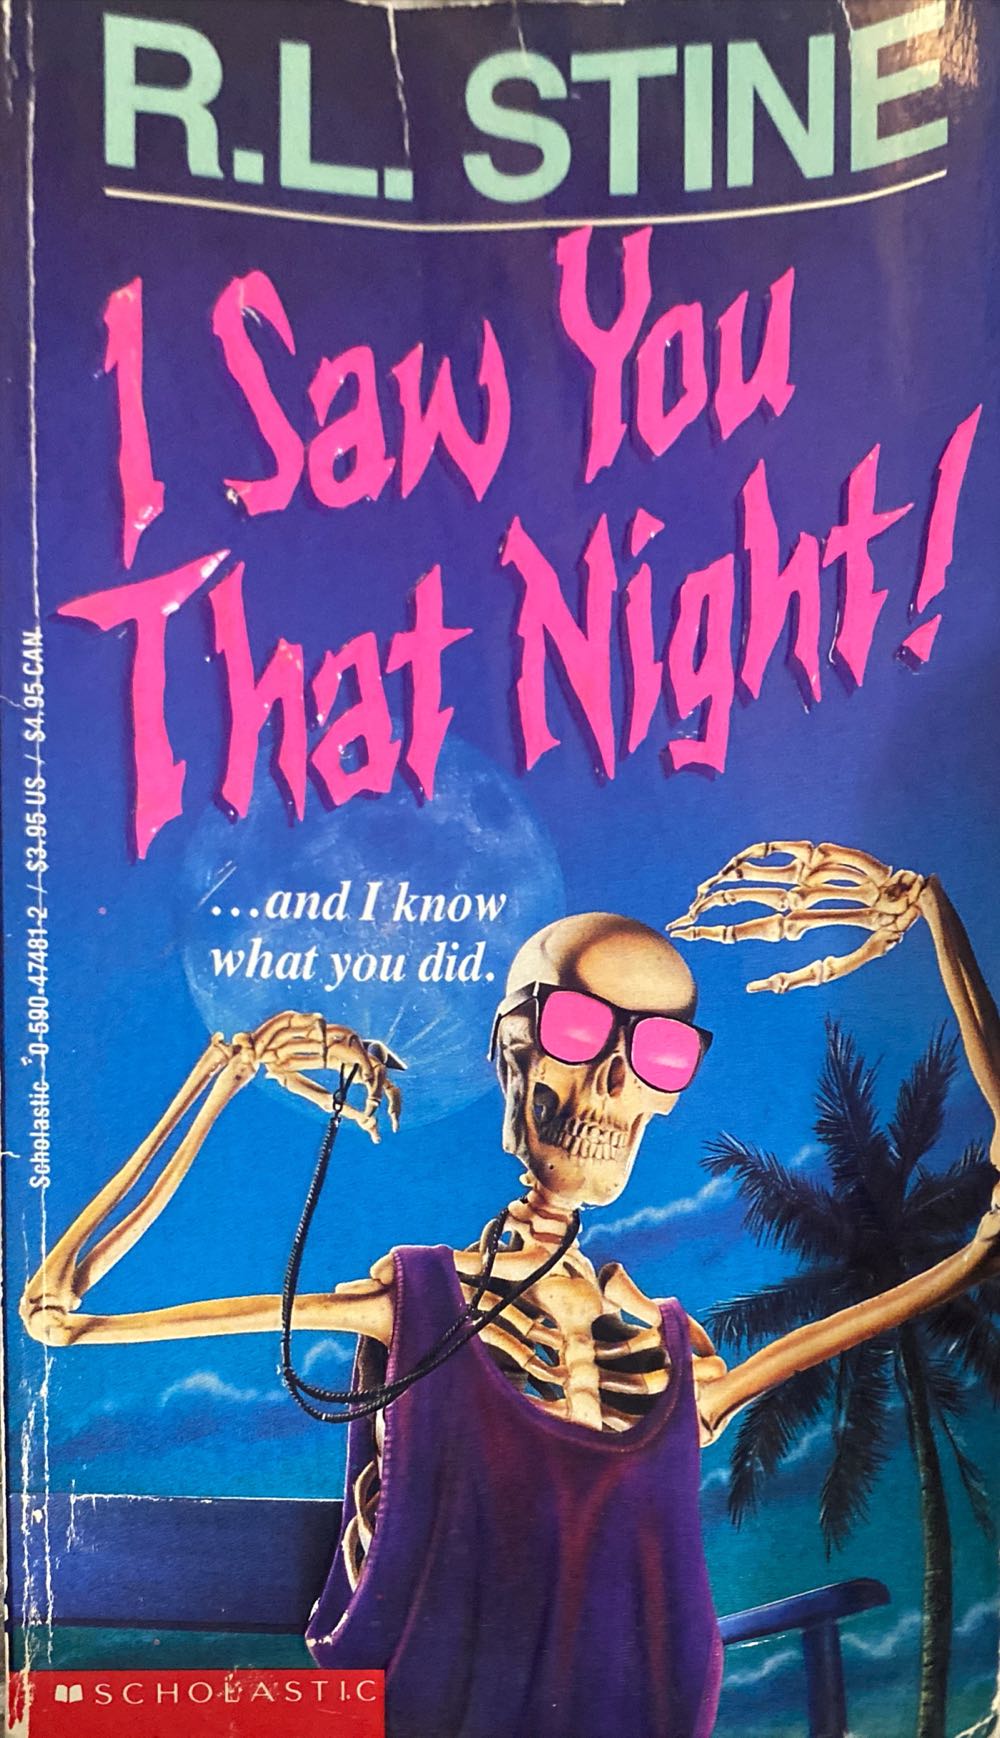 I Saw You That Night - R.L. Stine (Scholastic - Paperback) book collectible [Barcode 9780590474818] - Main Image 3